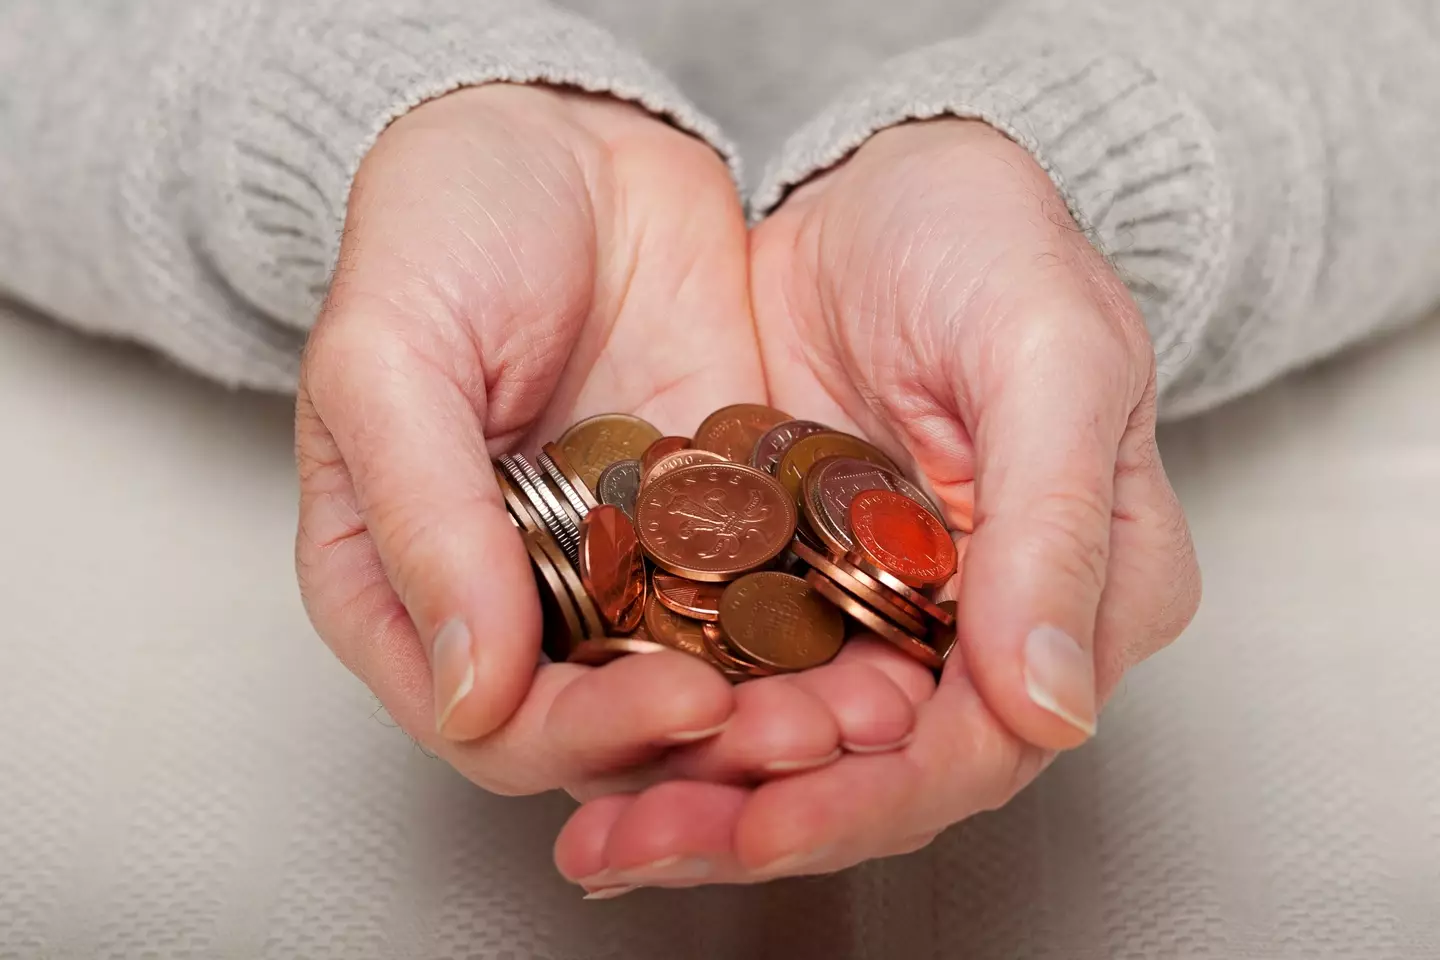 The 1p Challenge involves saving small amounts every day.